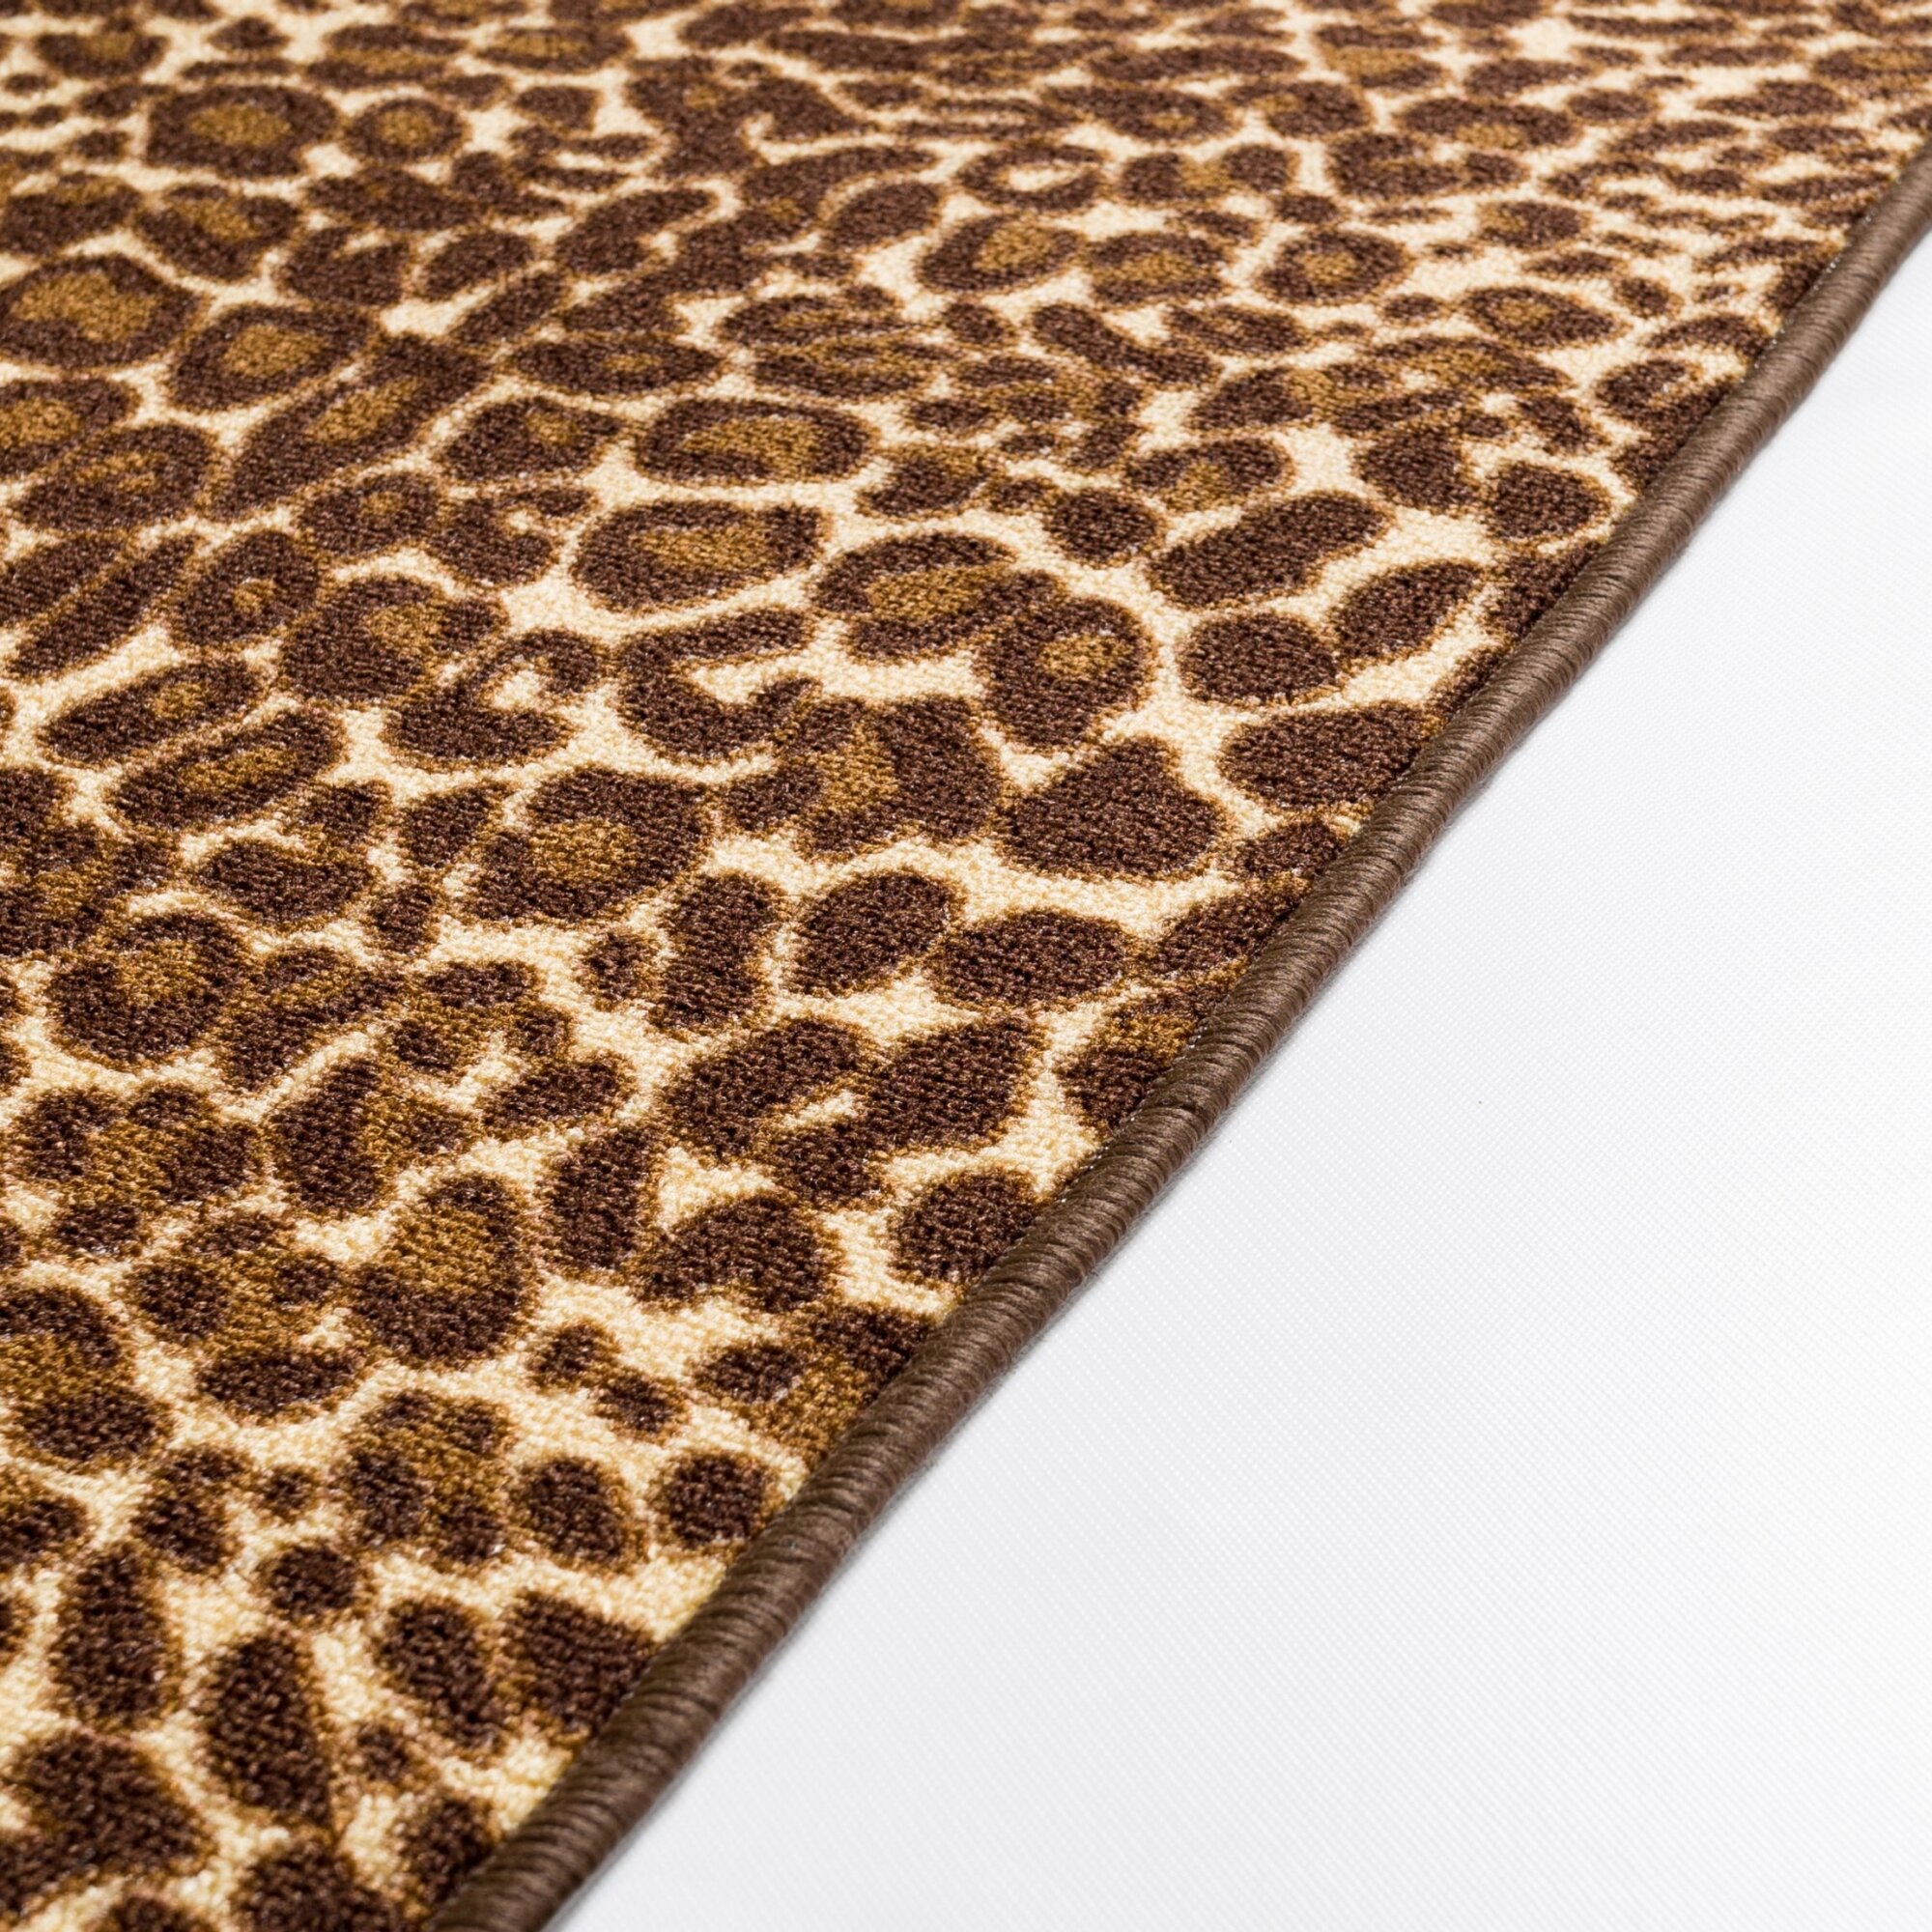 Well Woven Kings Court Gold Leopard Print Area Rug 0011 